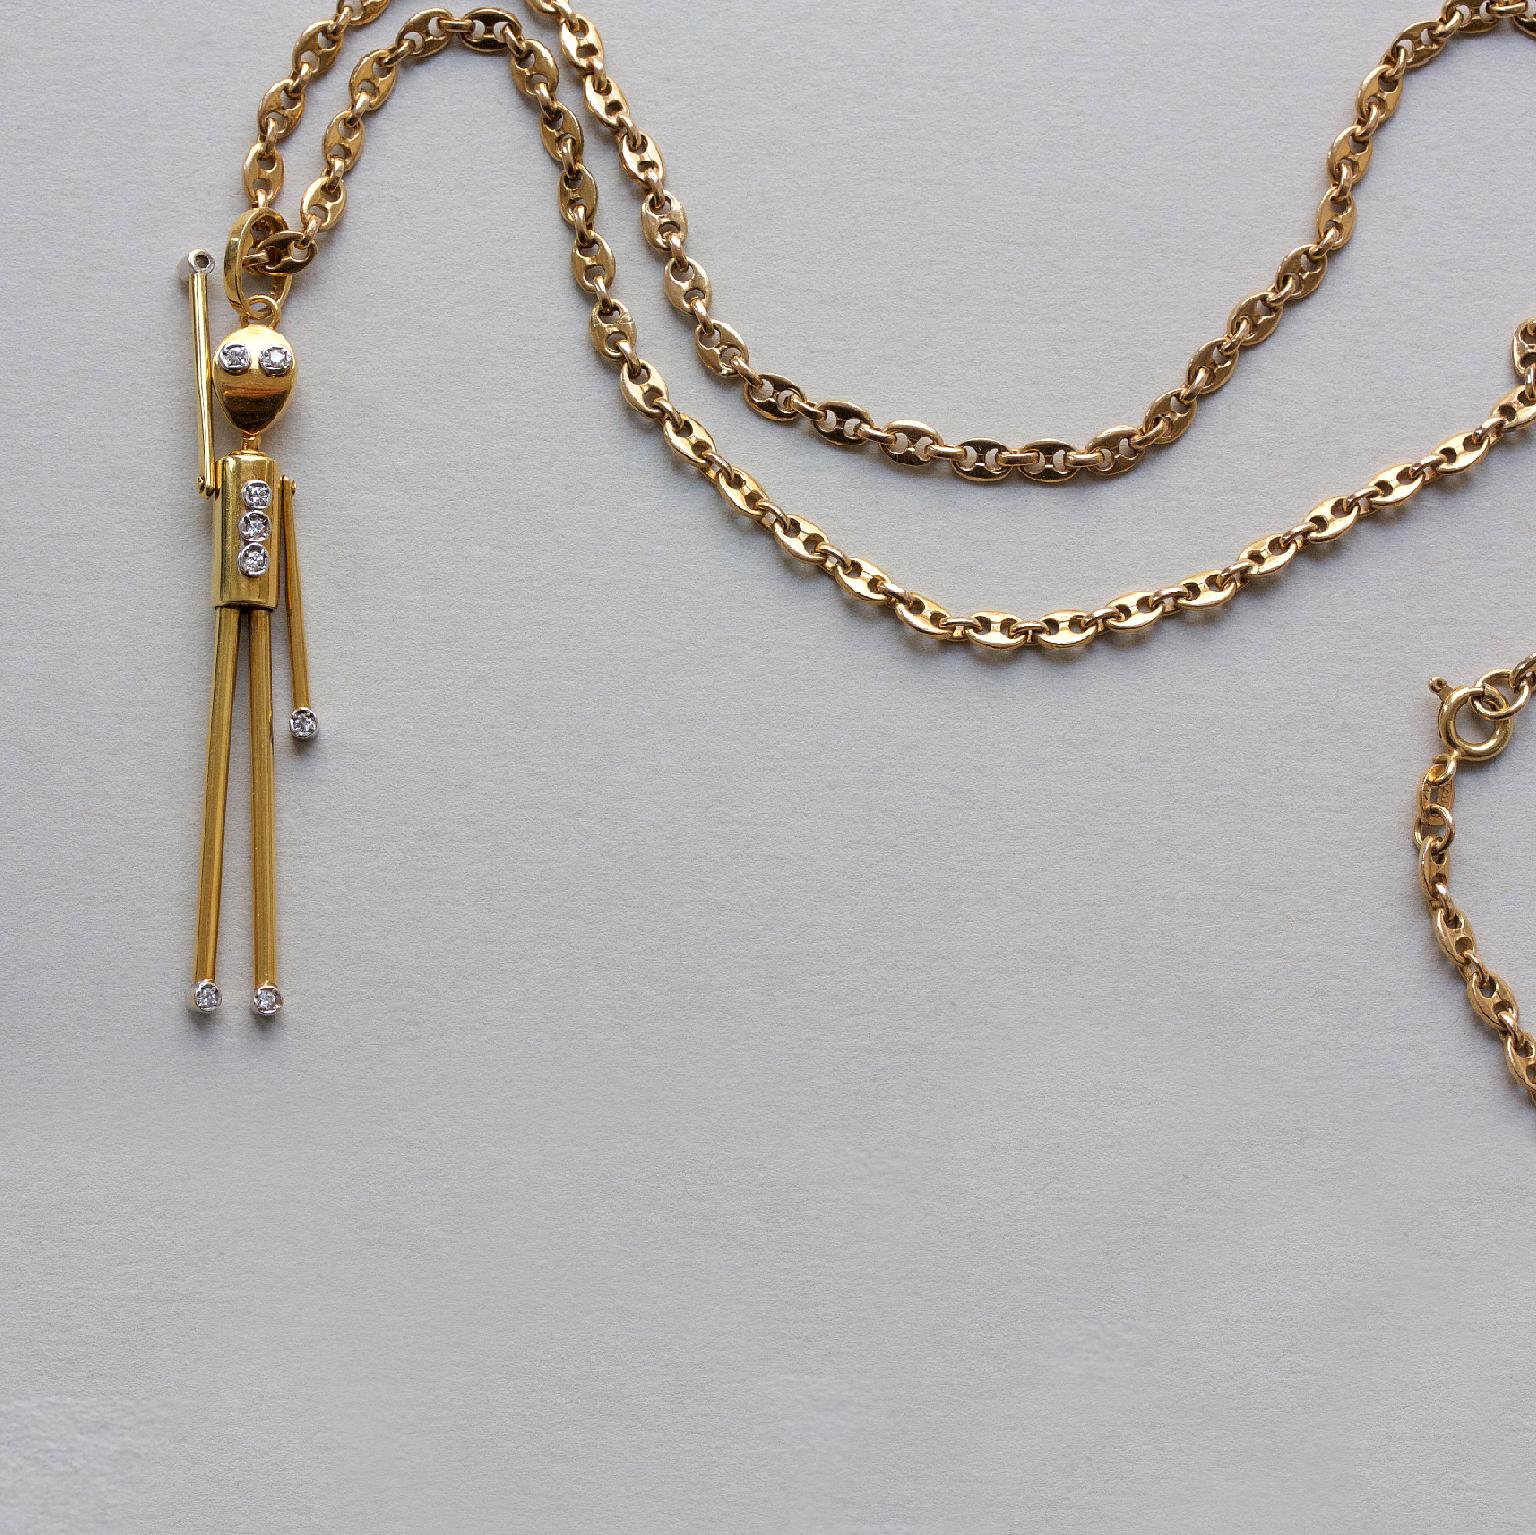 A 14 carat gold articulate stick man or robit charm with diamond eyes, hands, feet and buttons on a 14 carat gold mariner link chain, Italy, circa 1975.

weight: 20.08 grams
length chain: 61 cm
dimensions charm: 6 x 1 cm